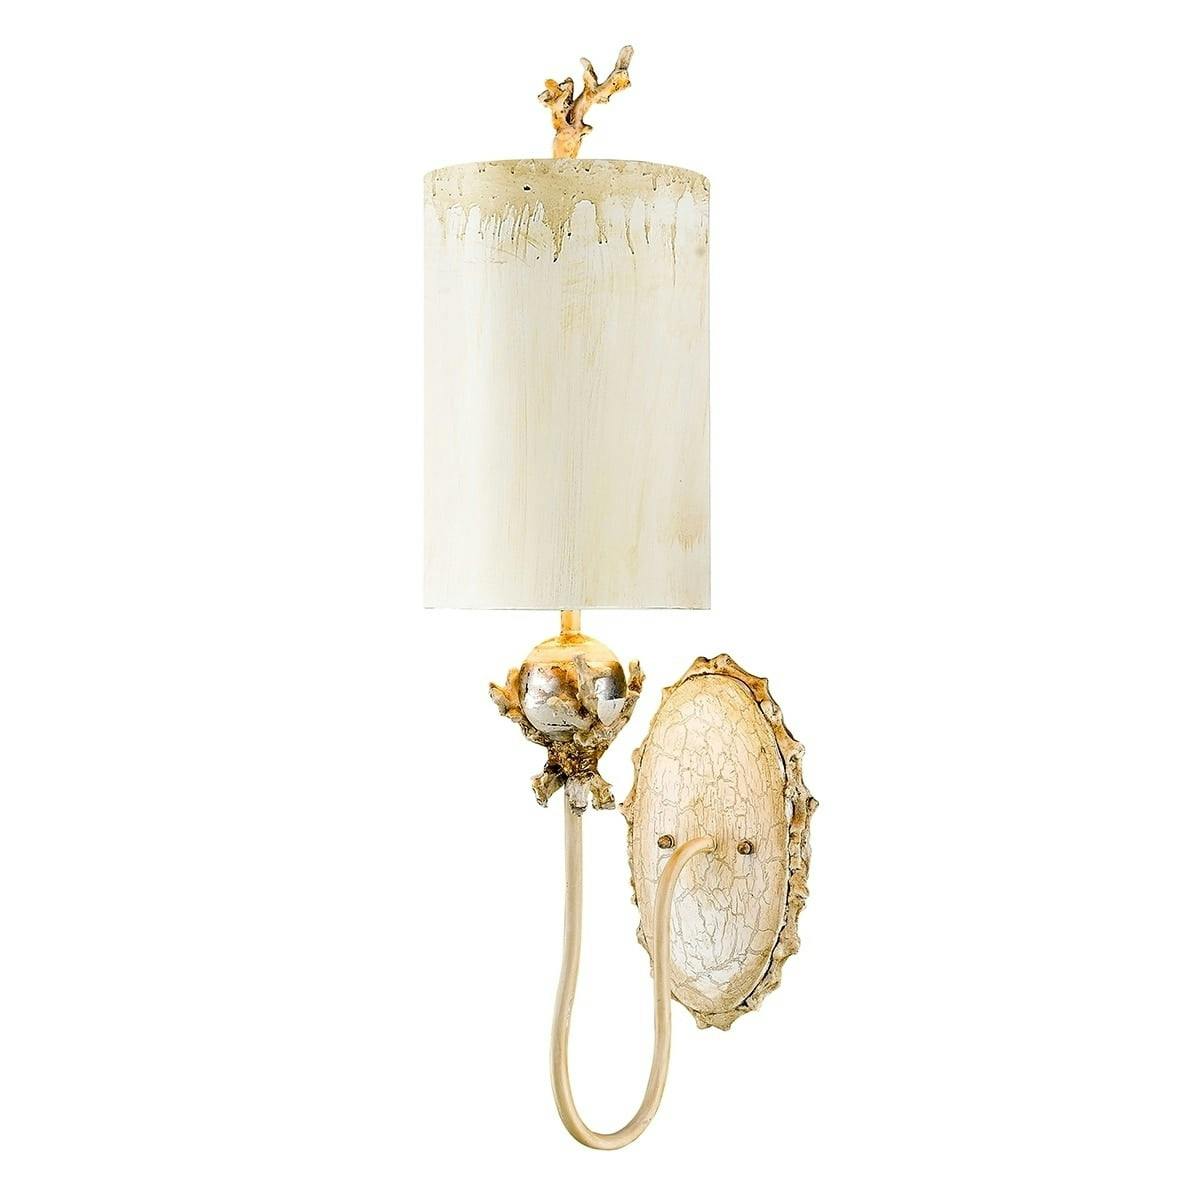 Putty Patina Silver Leaf Dimmable Cylinder Sconce with Hand-Painted Shade